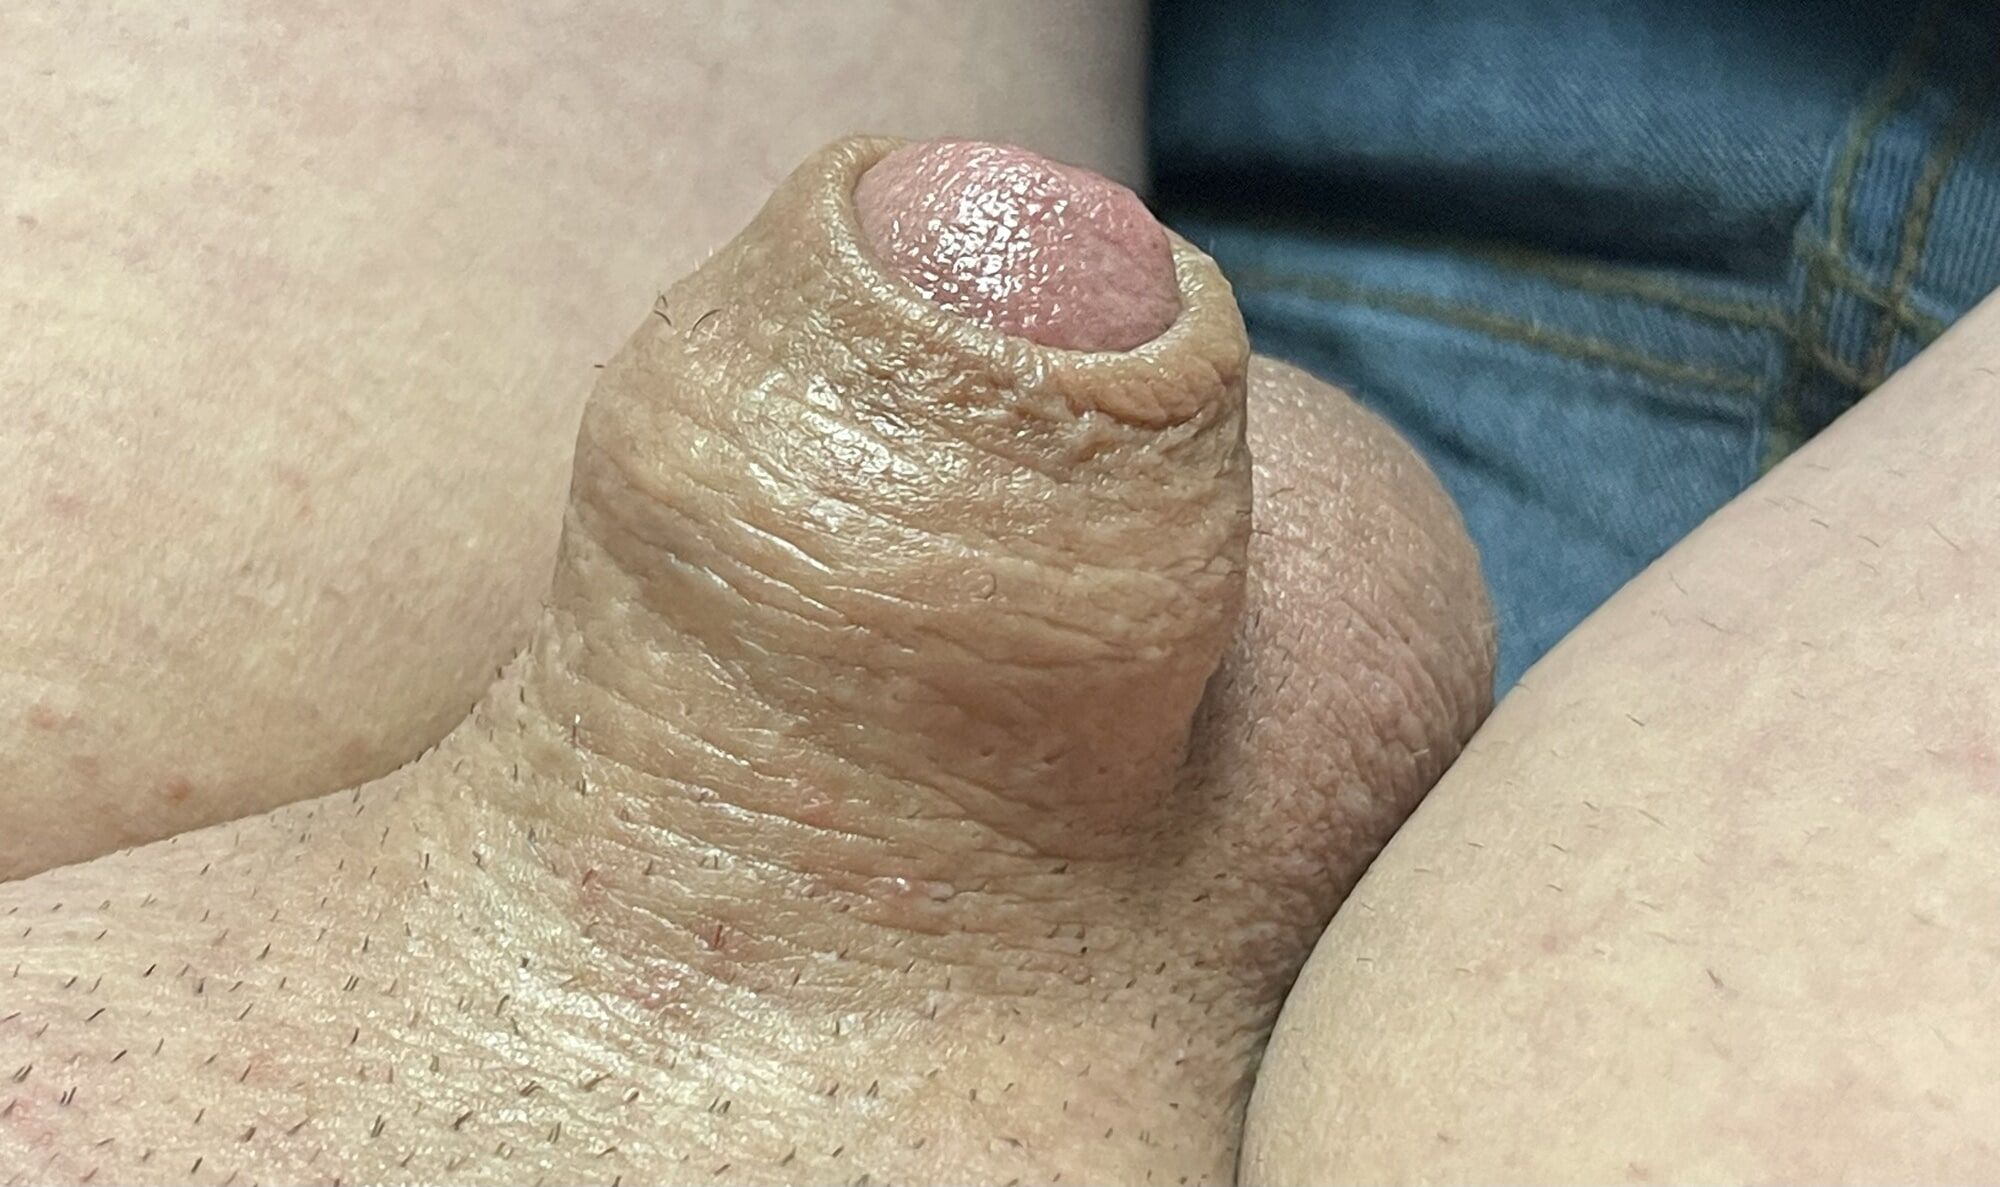 Inverted tiny penis #15